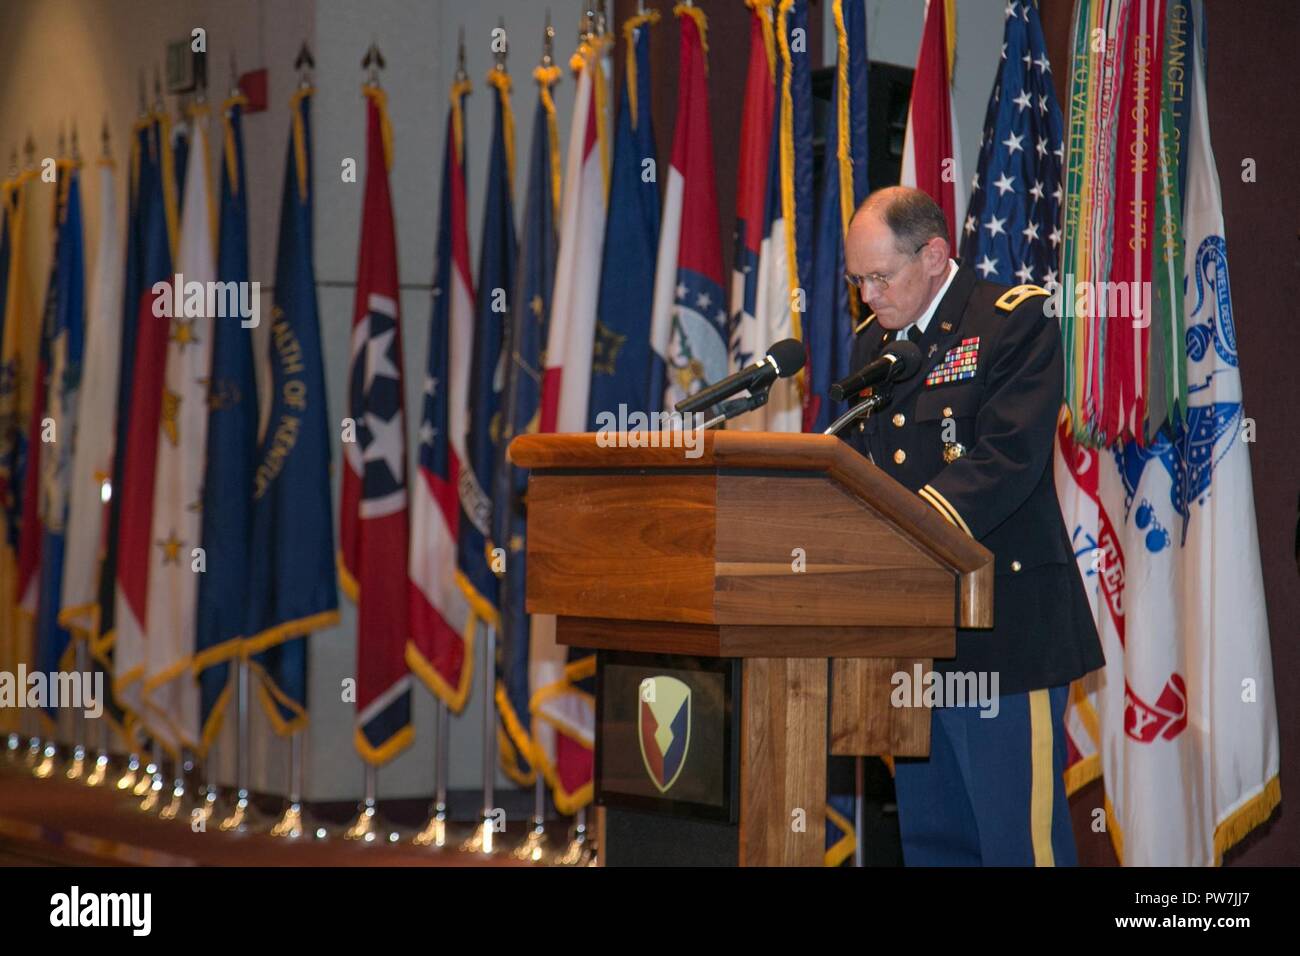 U.S. Army Chaplain Samuel Godfrey, from the Army Materiel Command, gives the invocation during the Hispanic-American Heritage Month Observance Sept. 25, 2017 at Redstone Arsenal, Alabama. The guest speaker for the event was Christine Chavez, granddaughter of labor leader and civil rights activist Cesar Chavez. Stock Photo